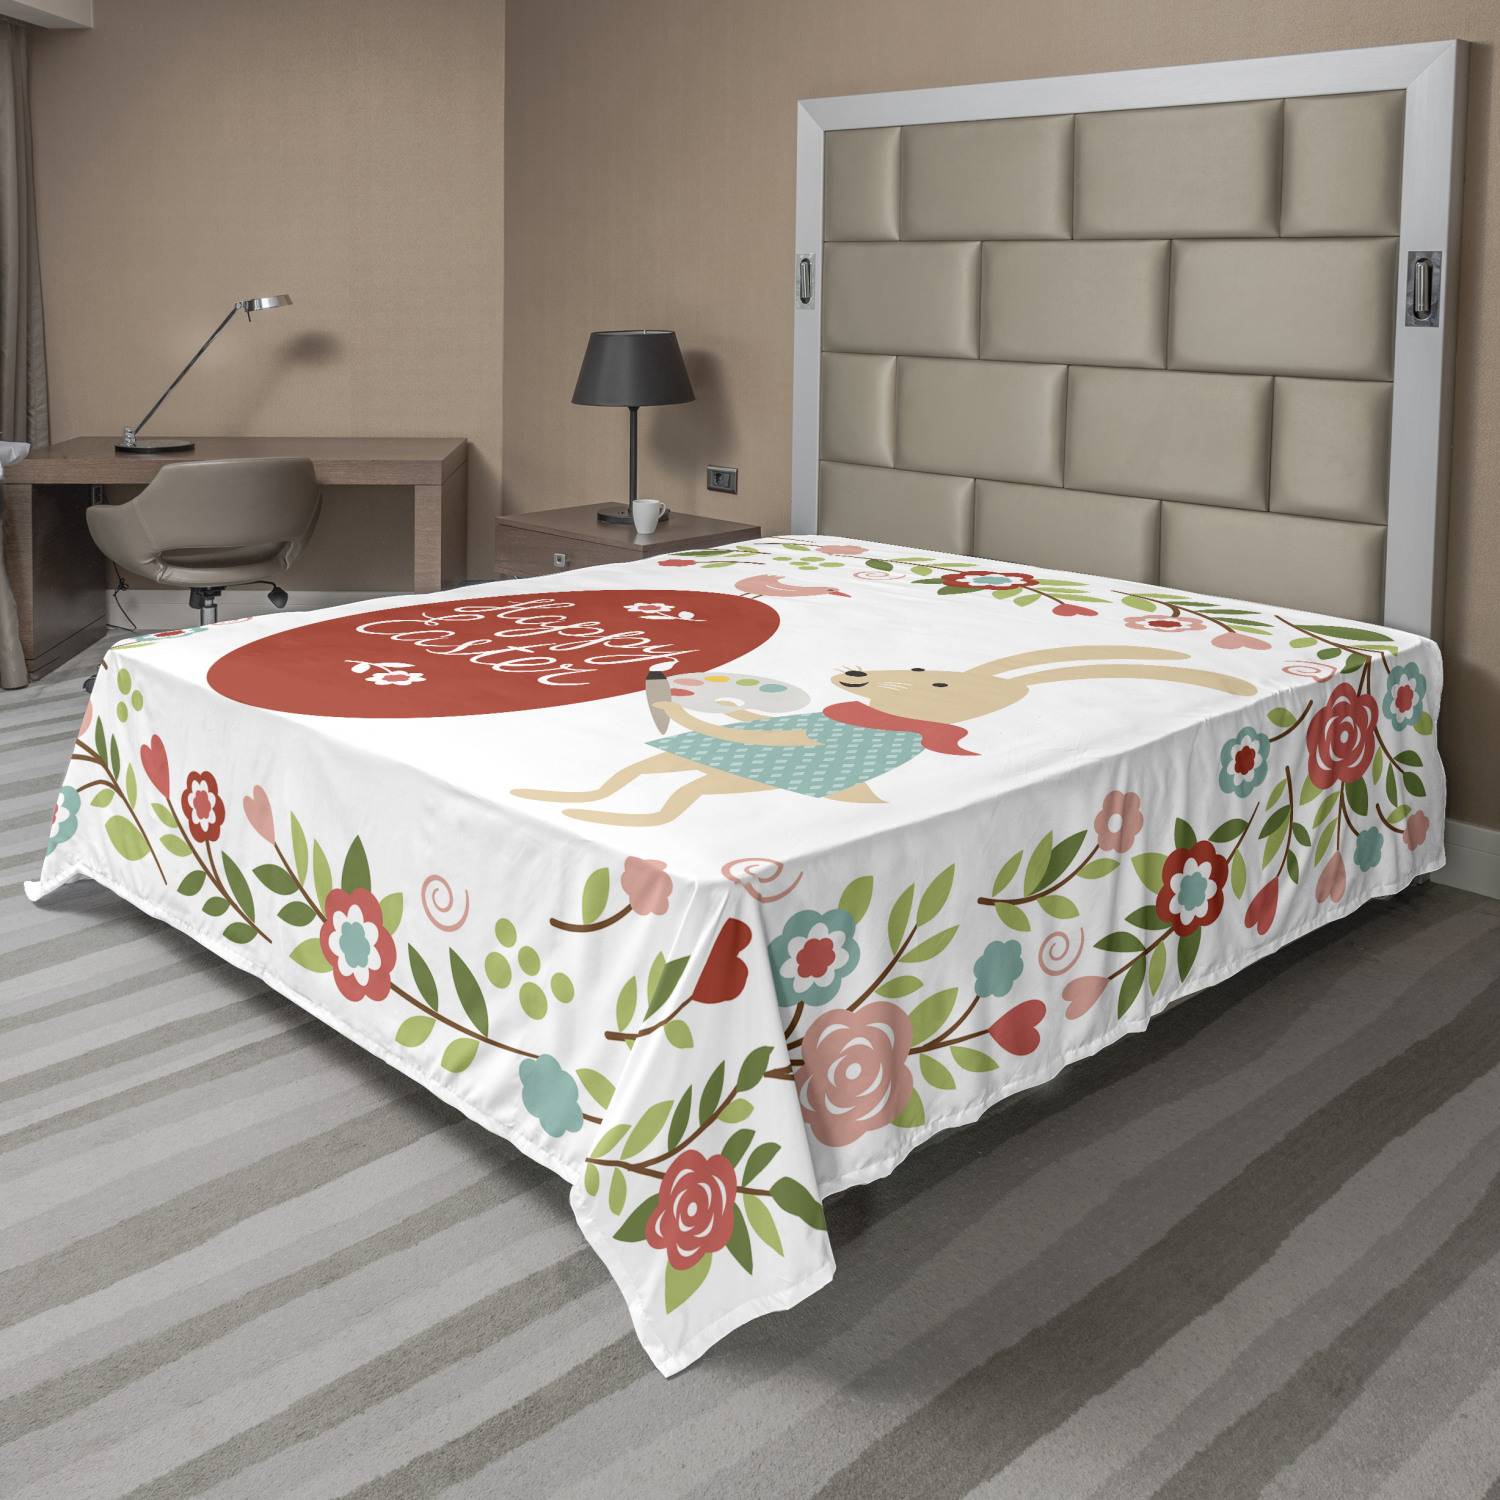 Details about   Ambesonne Easter Theme Flat Sheet Top Sheet Decorative Bedding 6 Sizes 